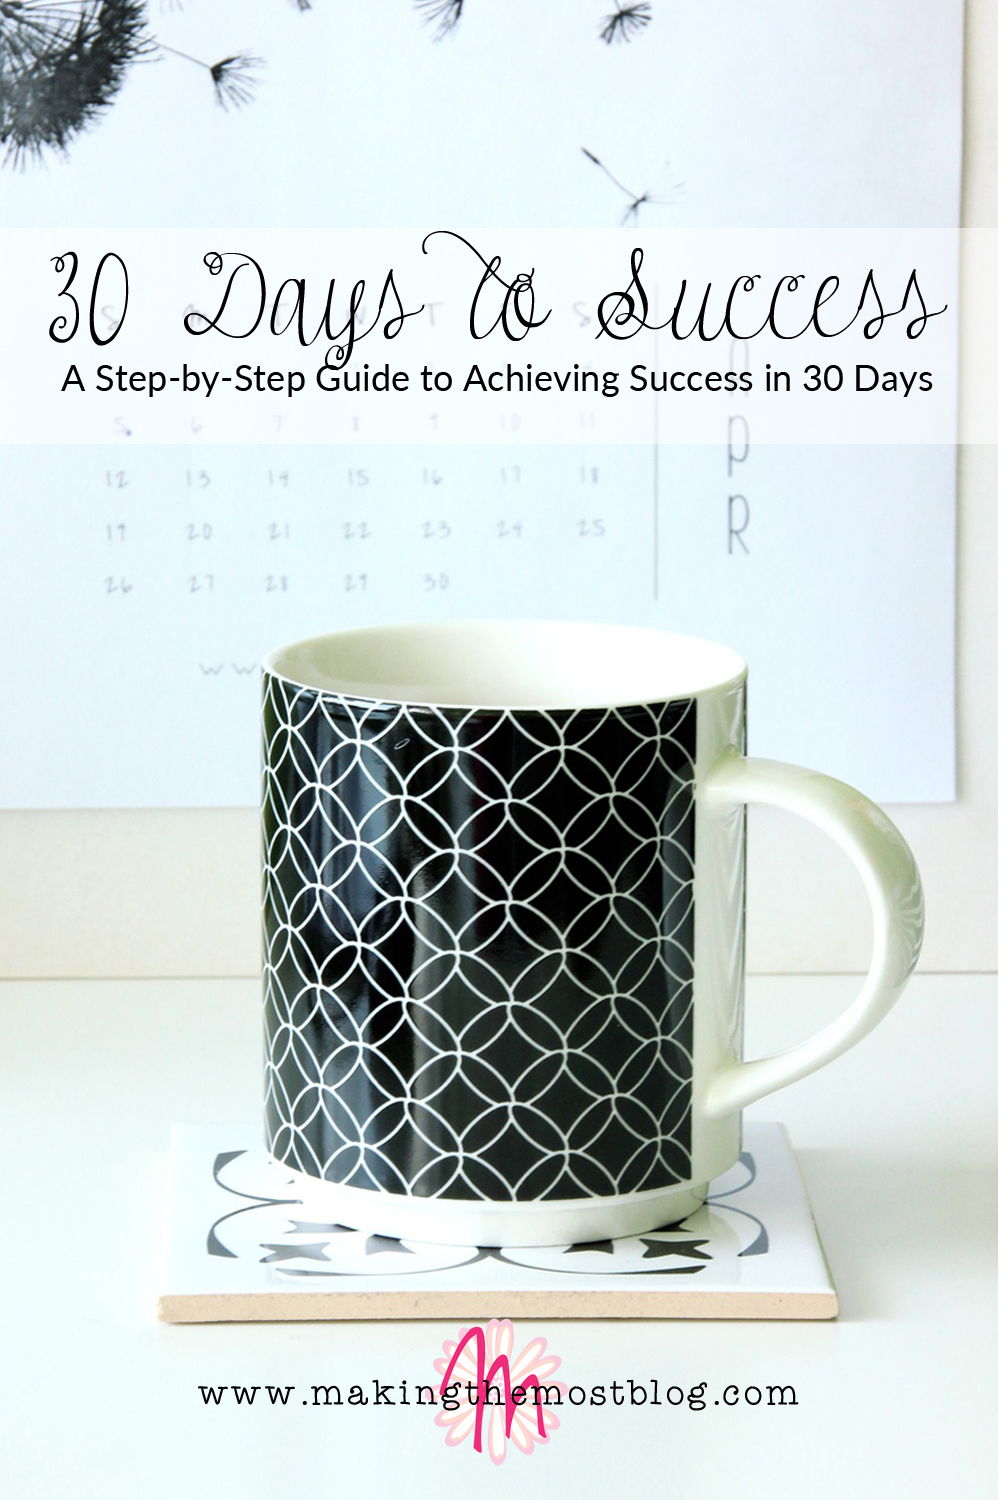 30 Days to Success: A Step-by-Step Guide to Achieving Success in 30 Days | Making the Most Blog